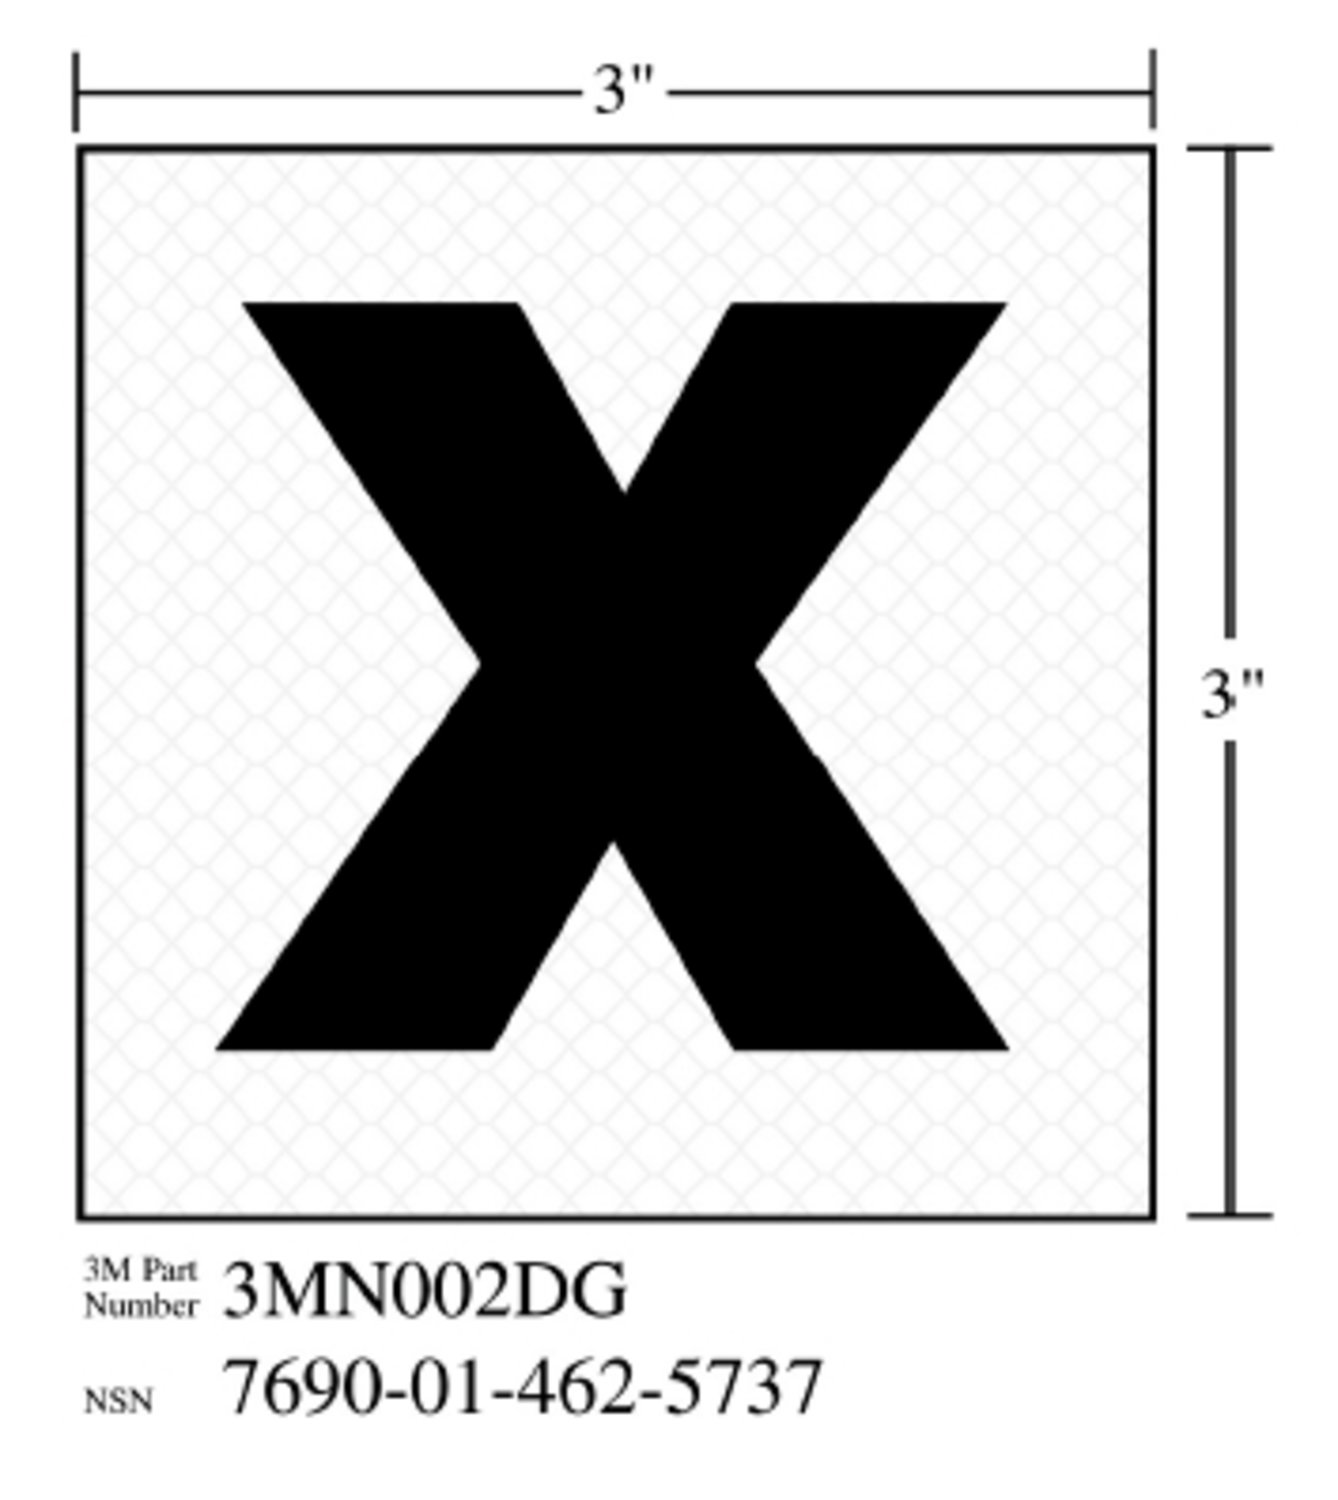 7010291655 - 3M Diamond Grade Damage Control Sign 3MN002DG, "X-Ray", 3 in x 3 in, 10/Package